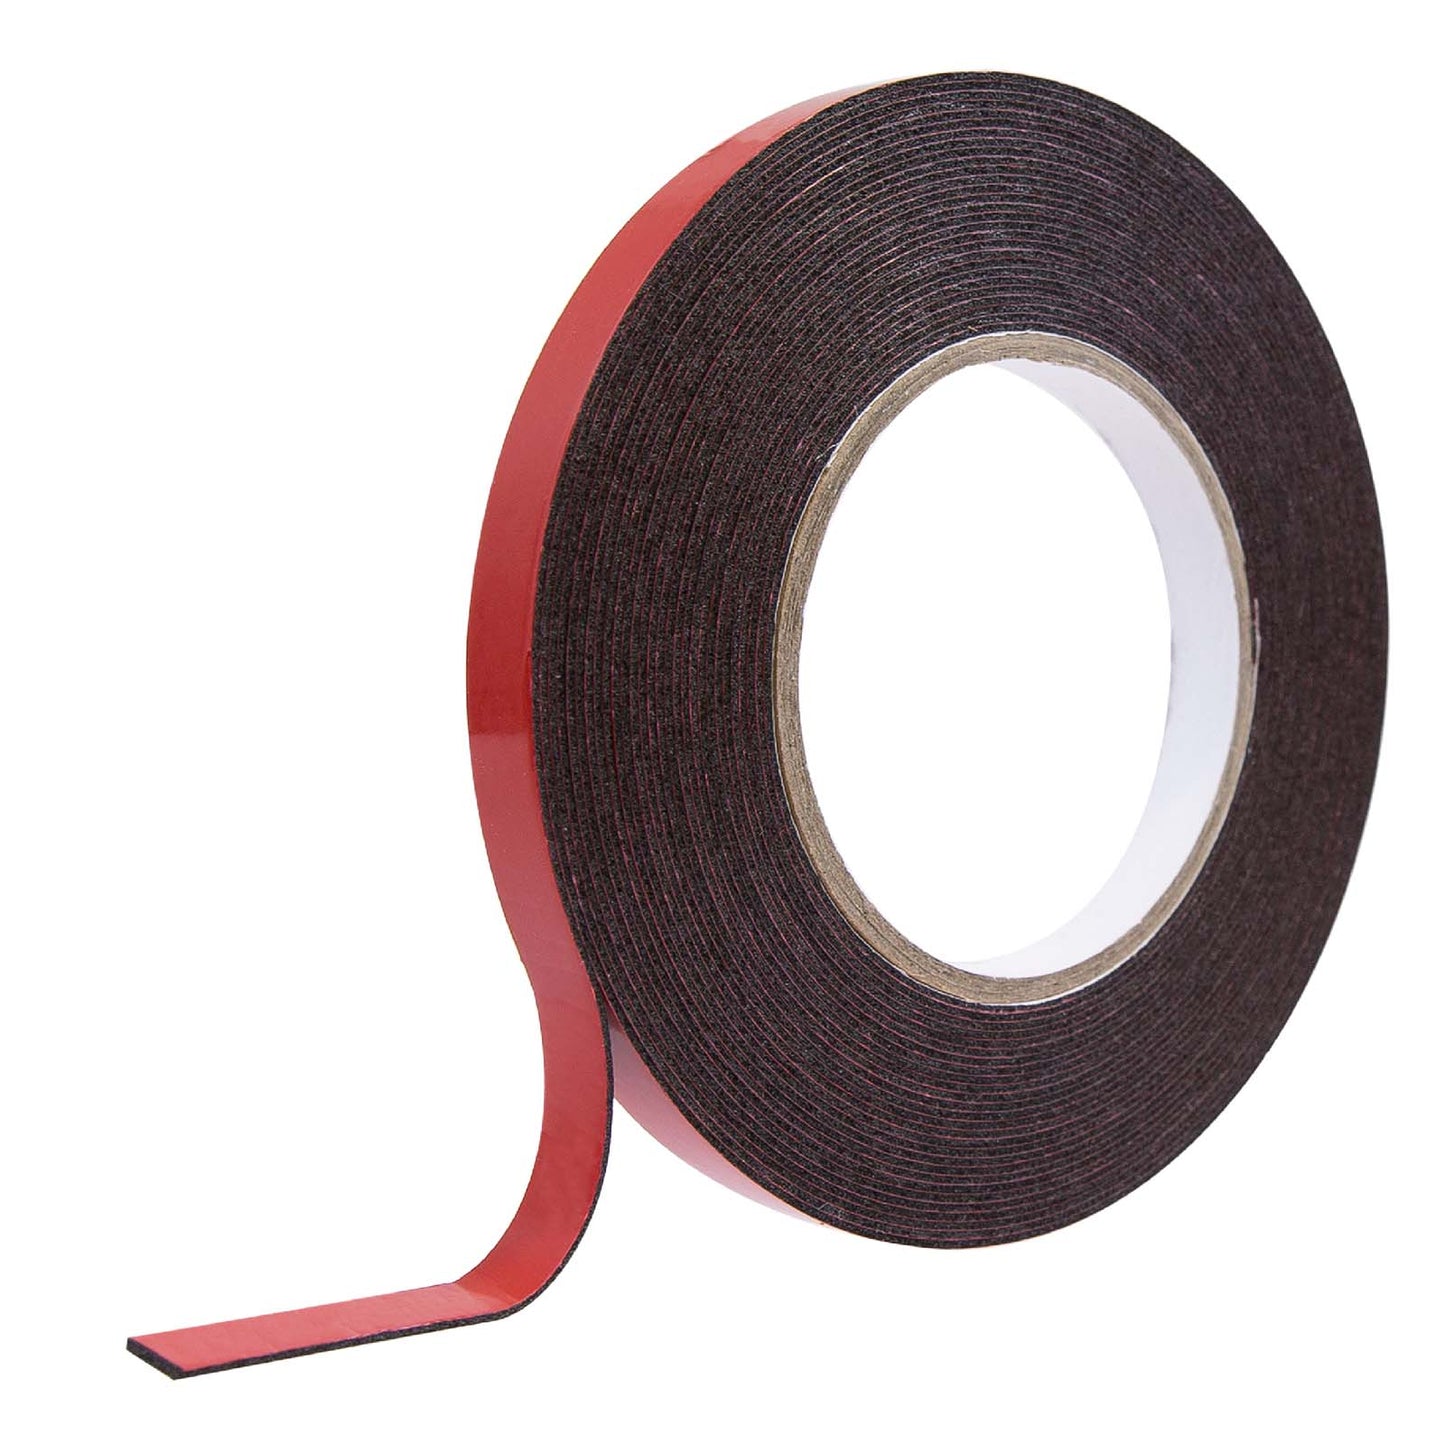 Black Outdoor Mounting Tape - 39.37' x 0.47" Roll